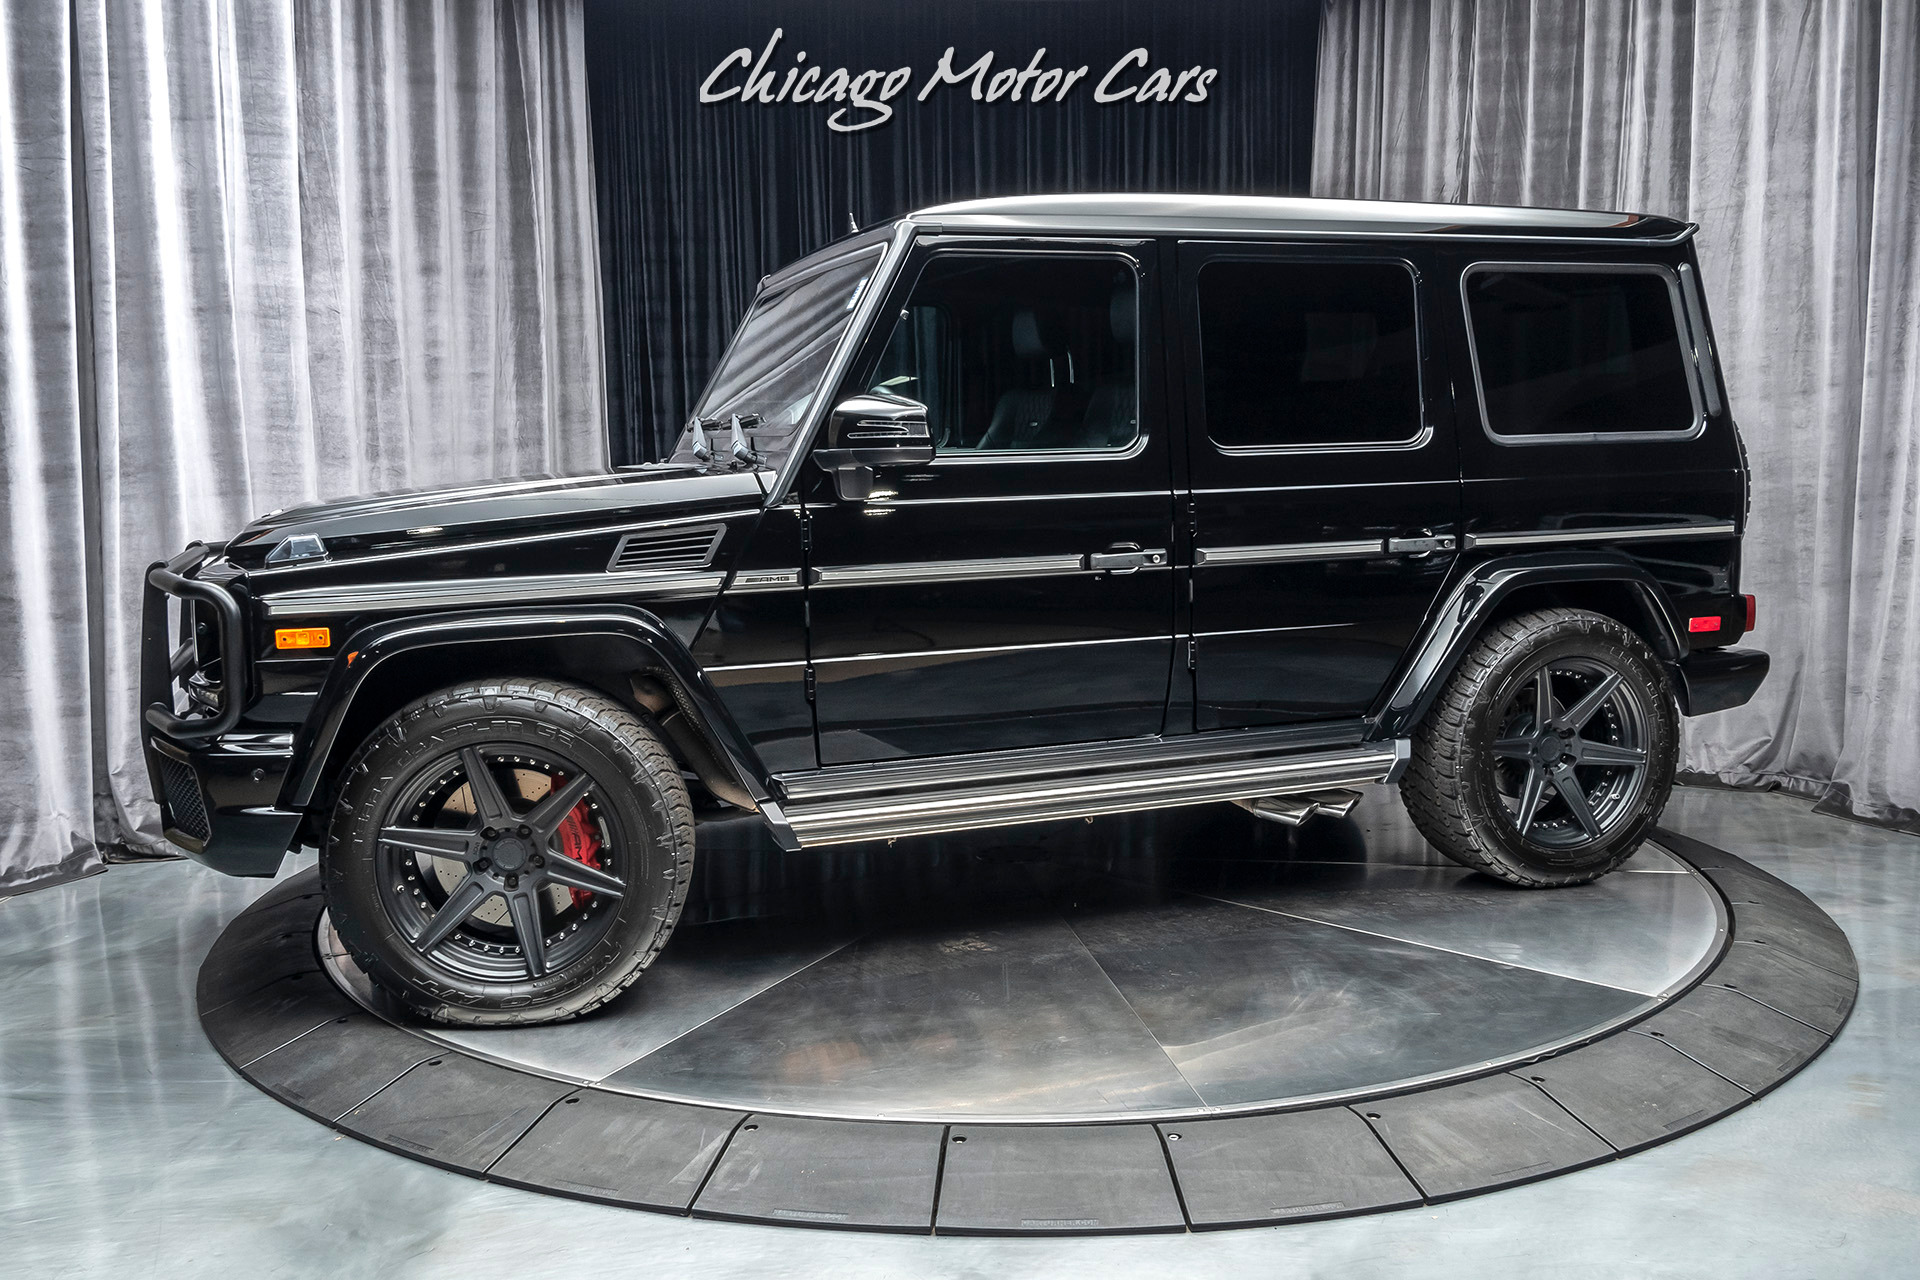 Armored Mercedes-Benz G63 AMG In Stock